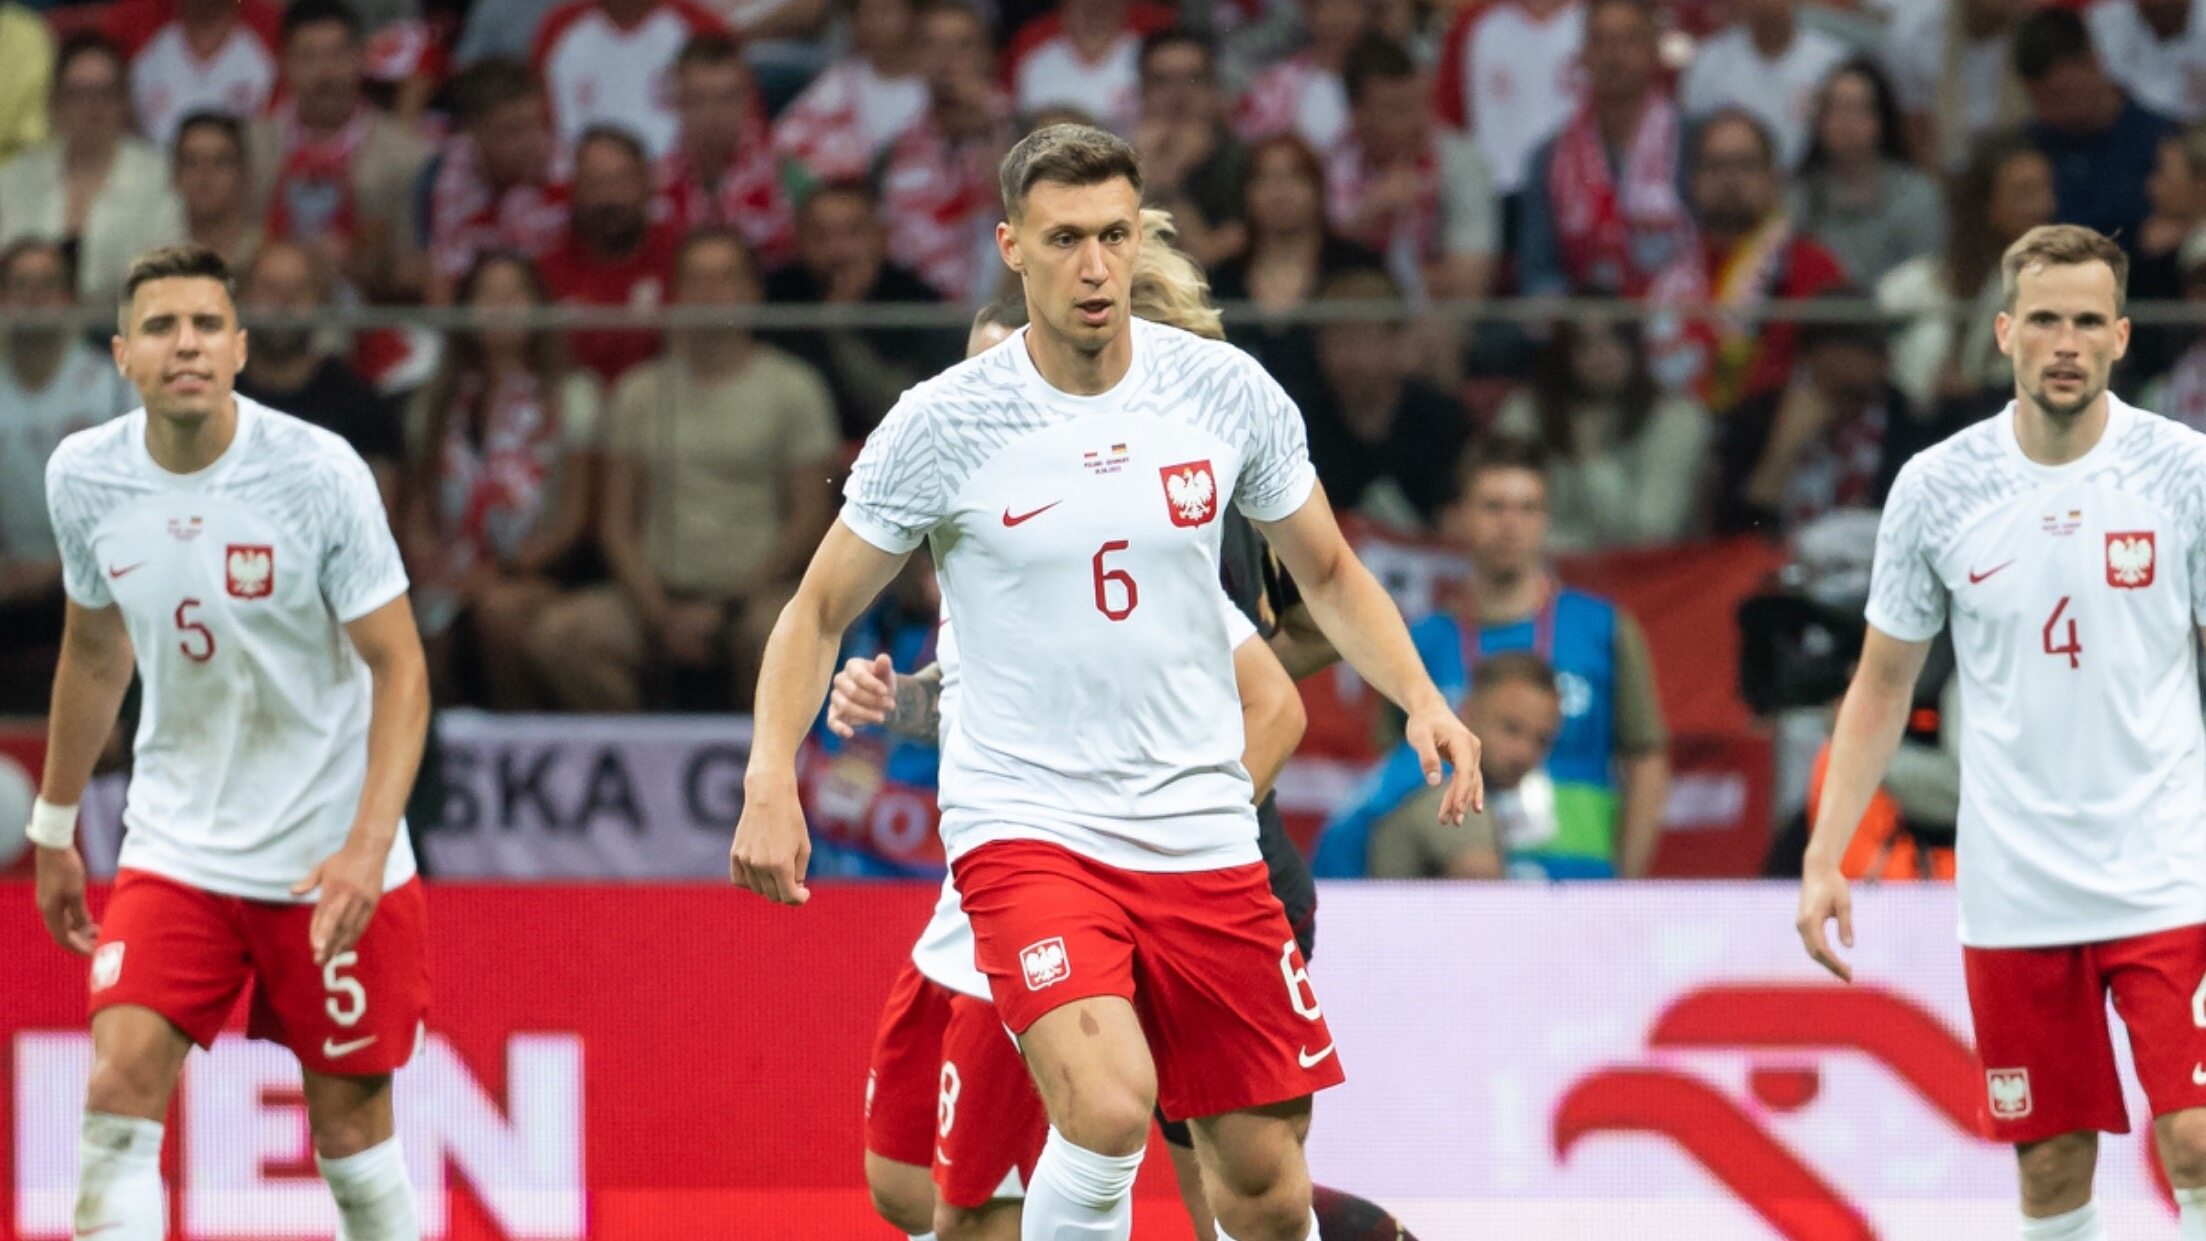 He played at the World Cup in Qatar, now he has been relegated to the third league.  Black Saturday of former Polish representatives